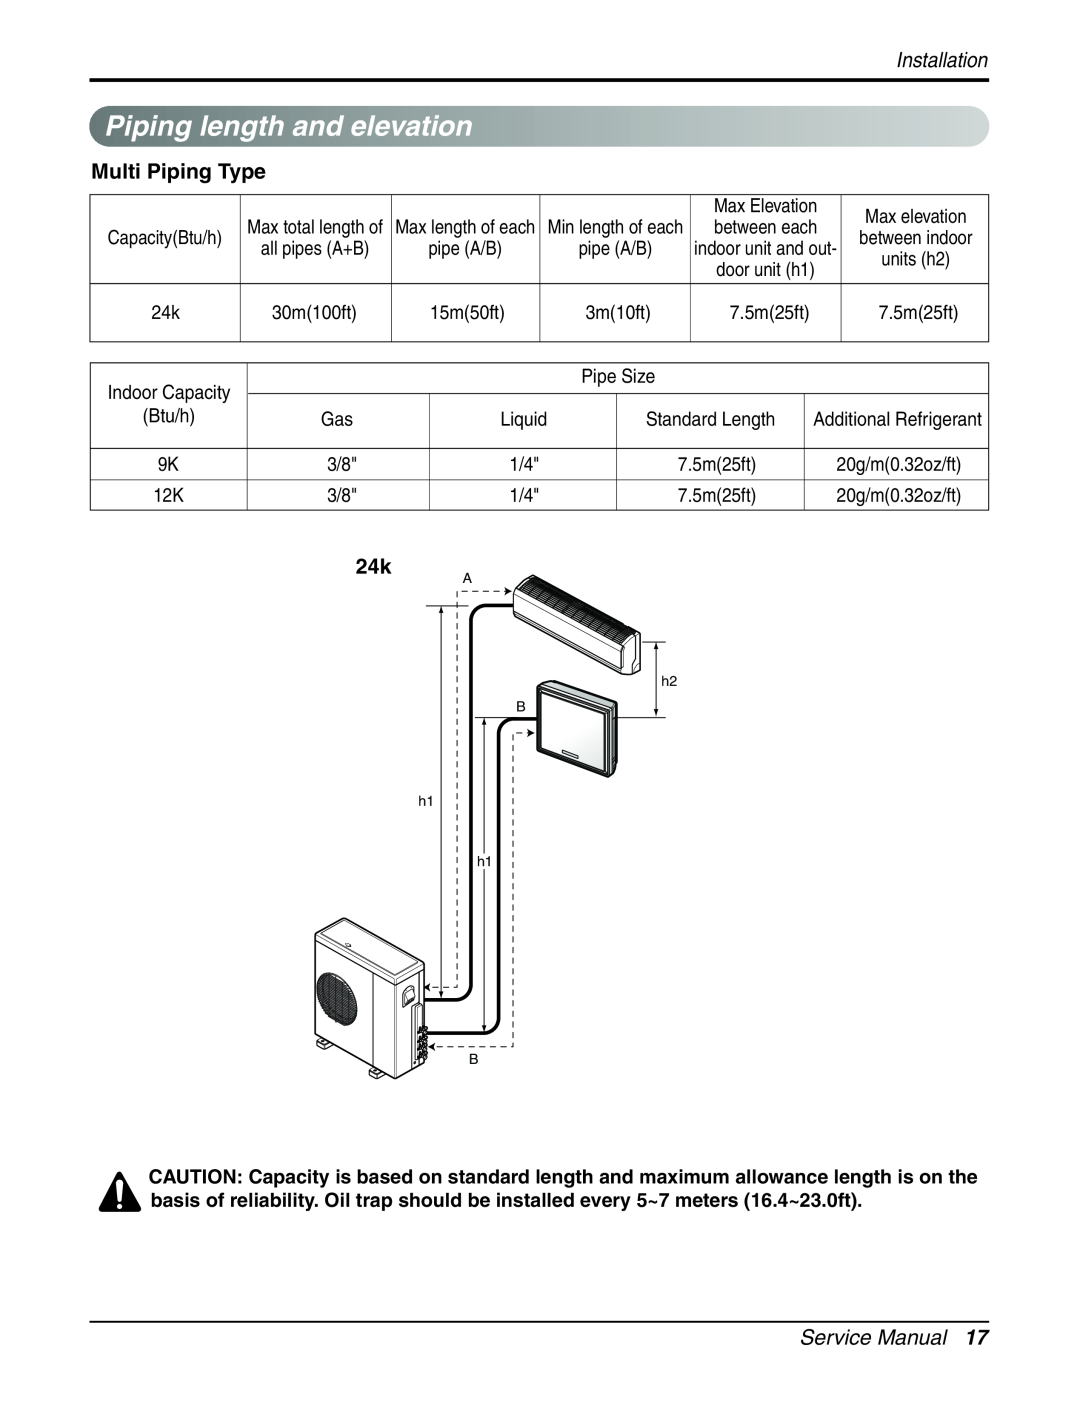 LG Electronics AMNC093APM0(LMAN090CNS) Piping length and elevation, Multi Piping Type, Installation, Service Manual 